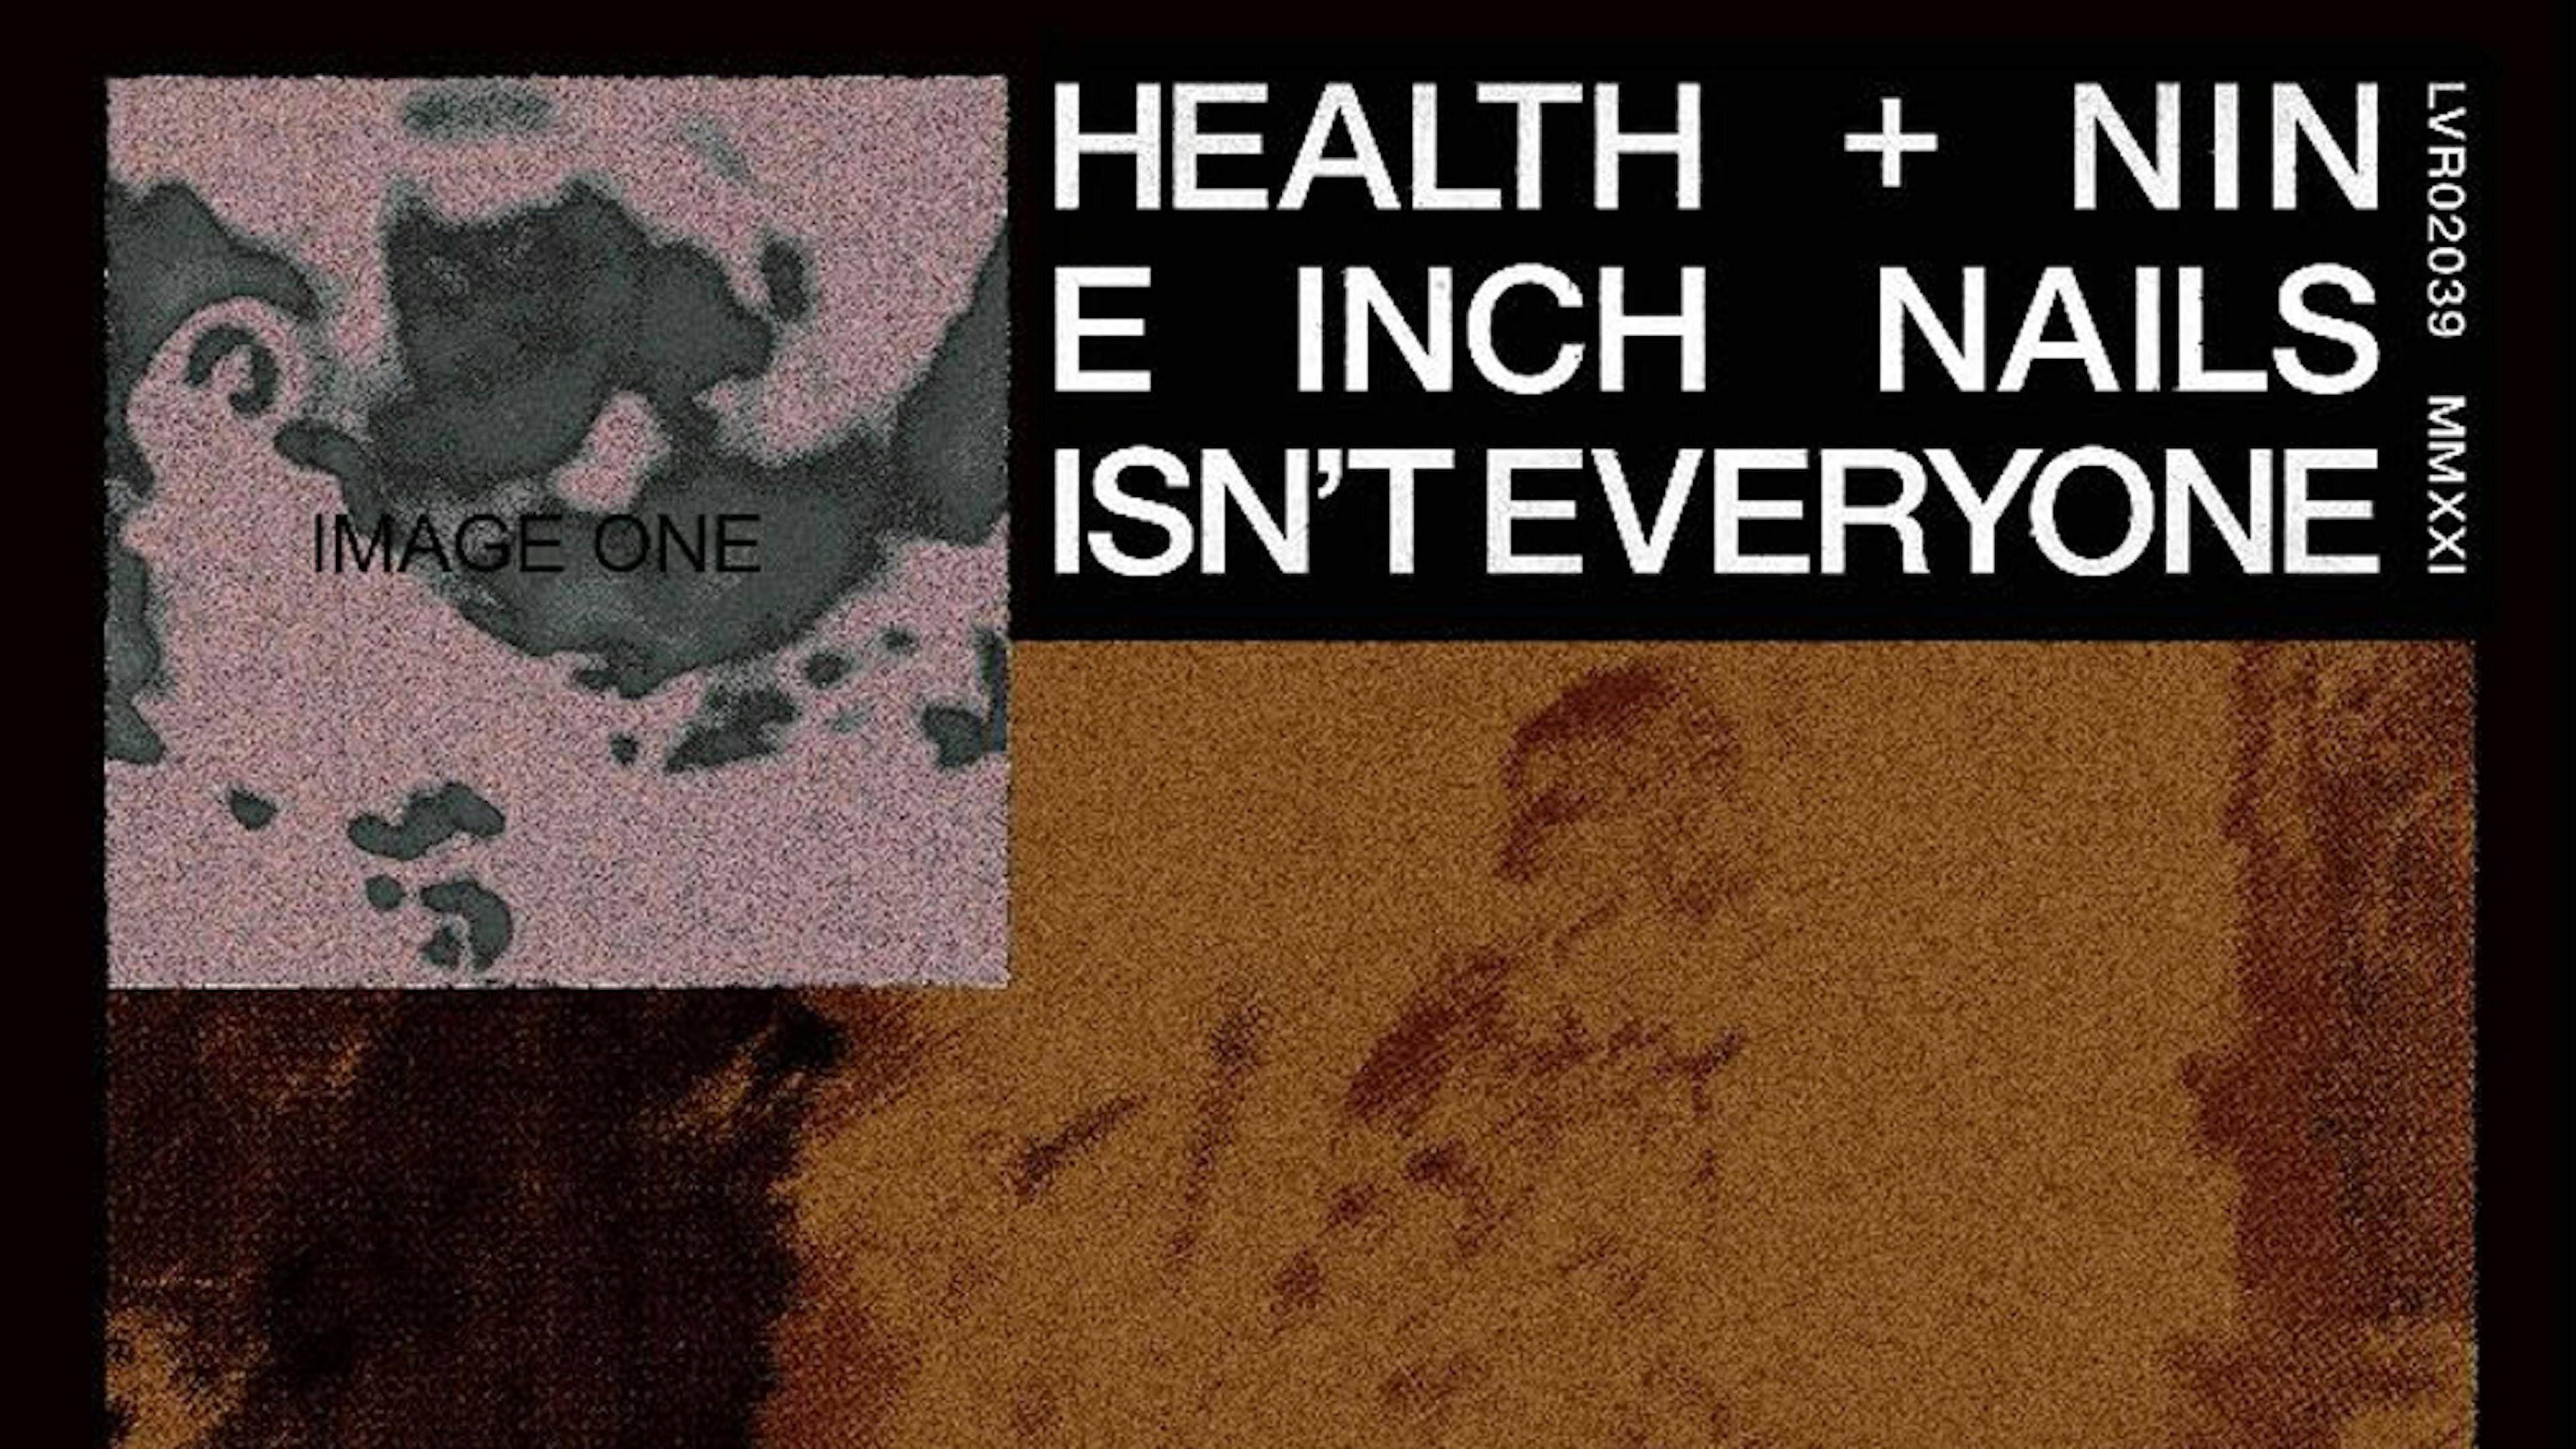 Listen to HEALTH and Nine Inch Nails collaborate on new track Isn't Everyone